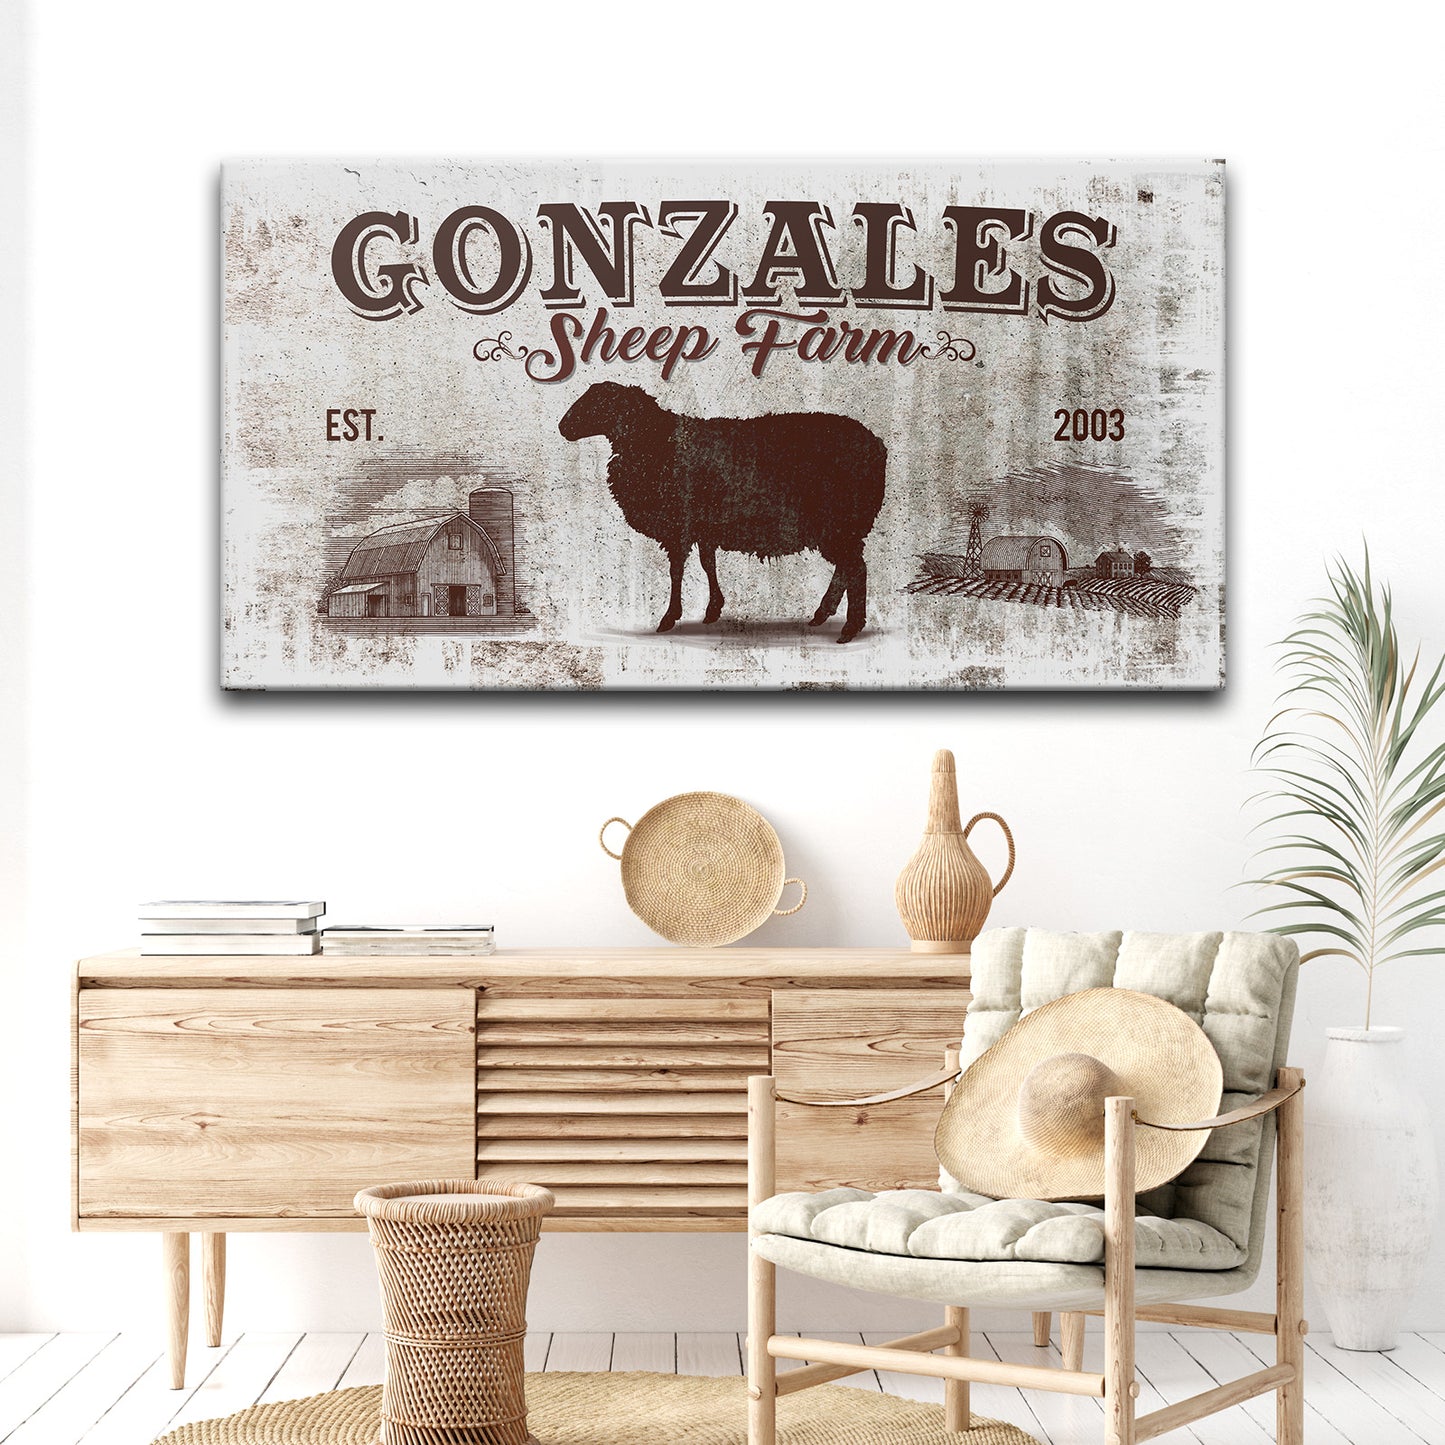 Sheep Farm Sign - Image by Tailored Canvases